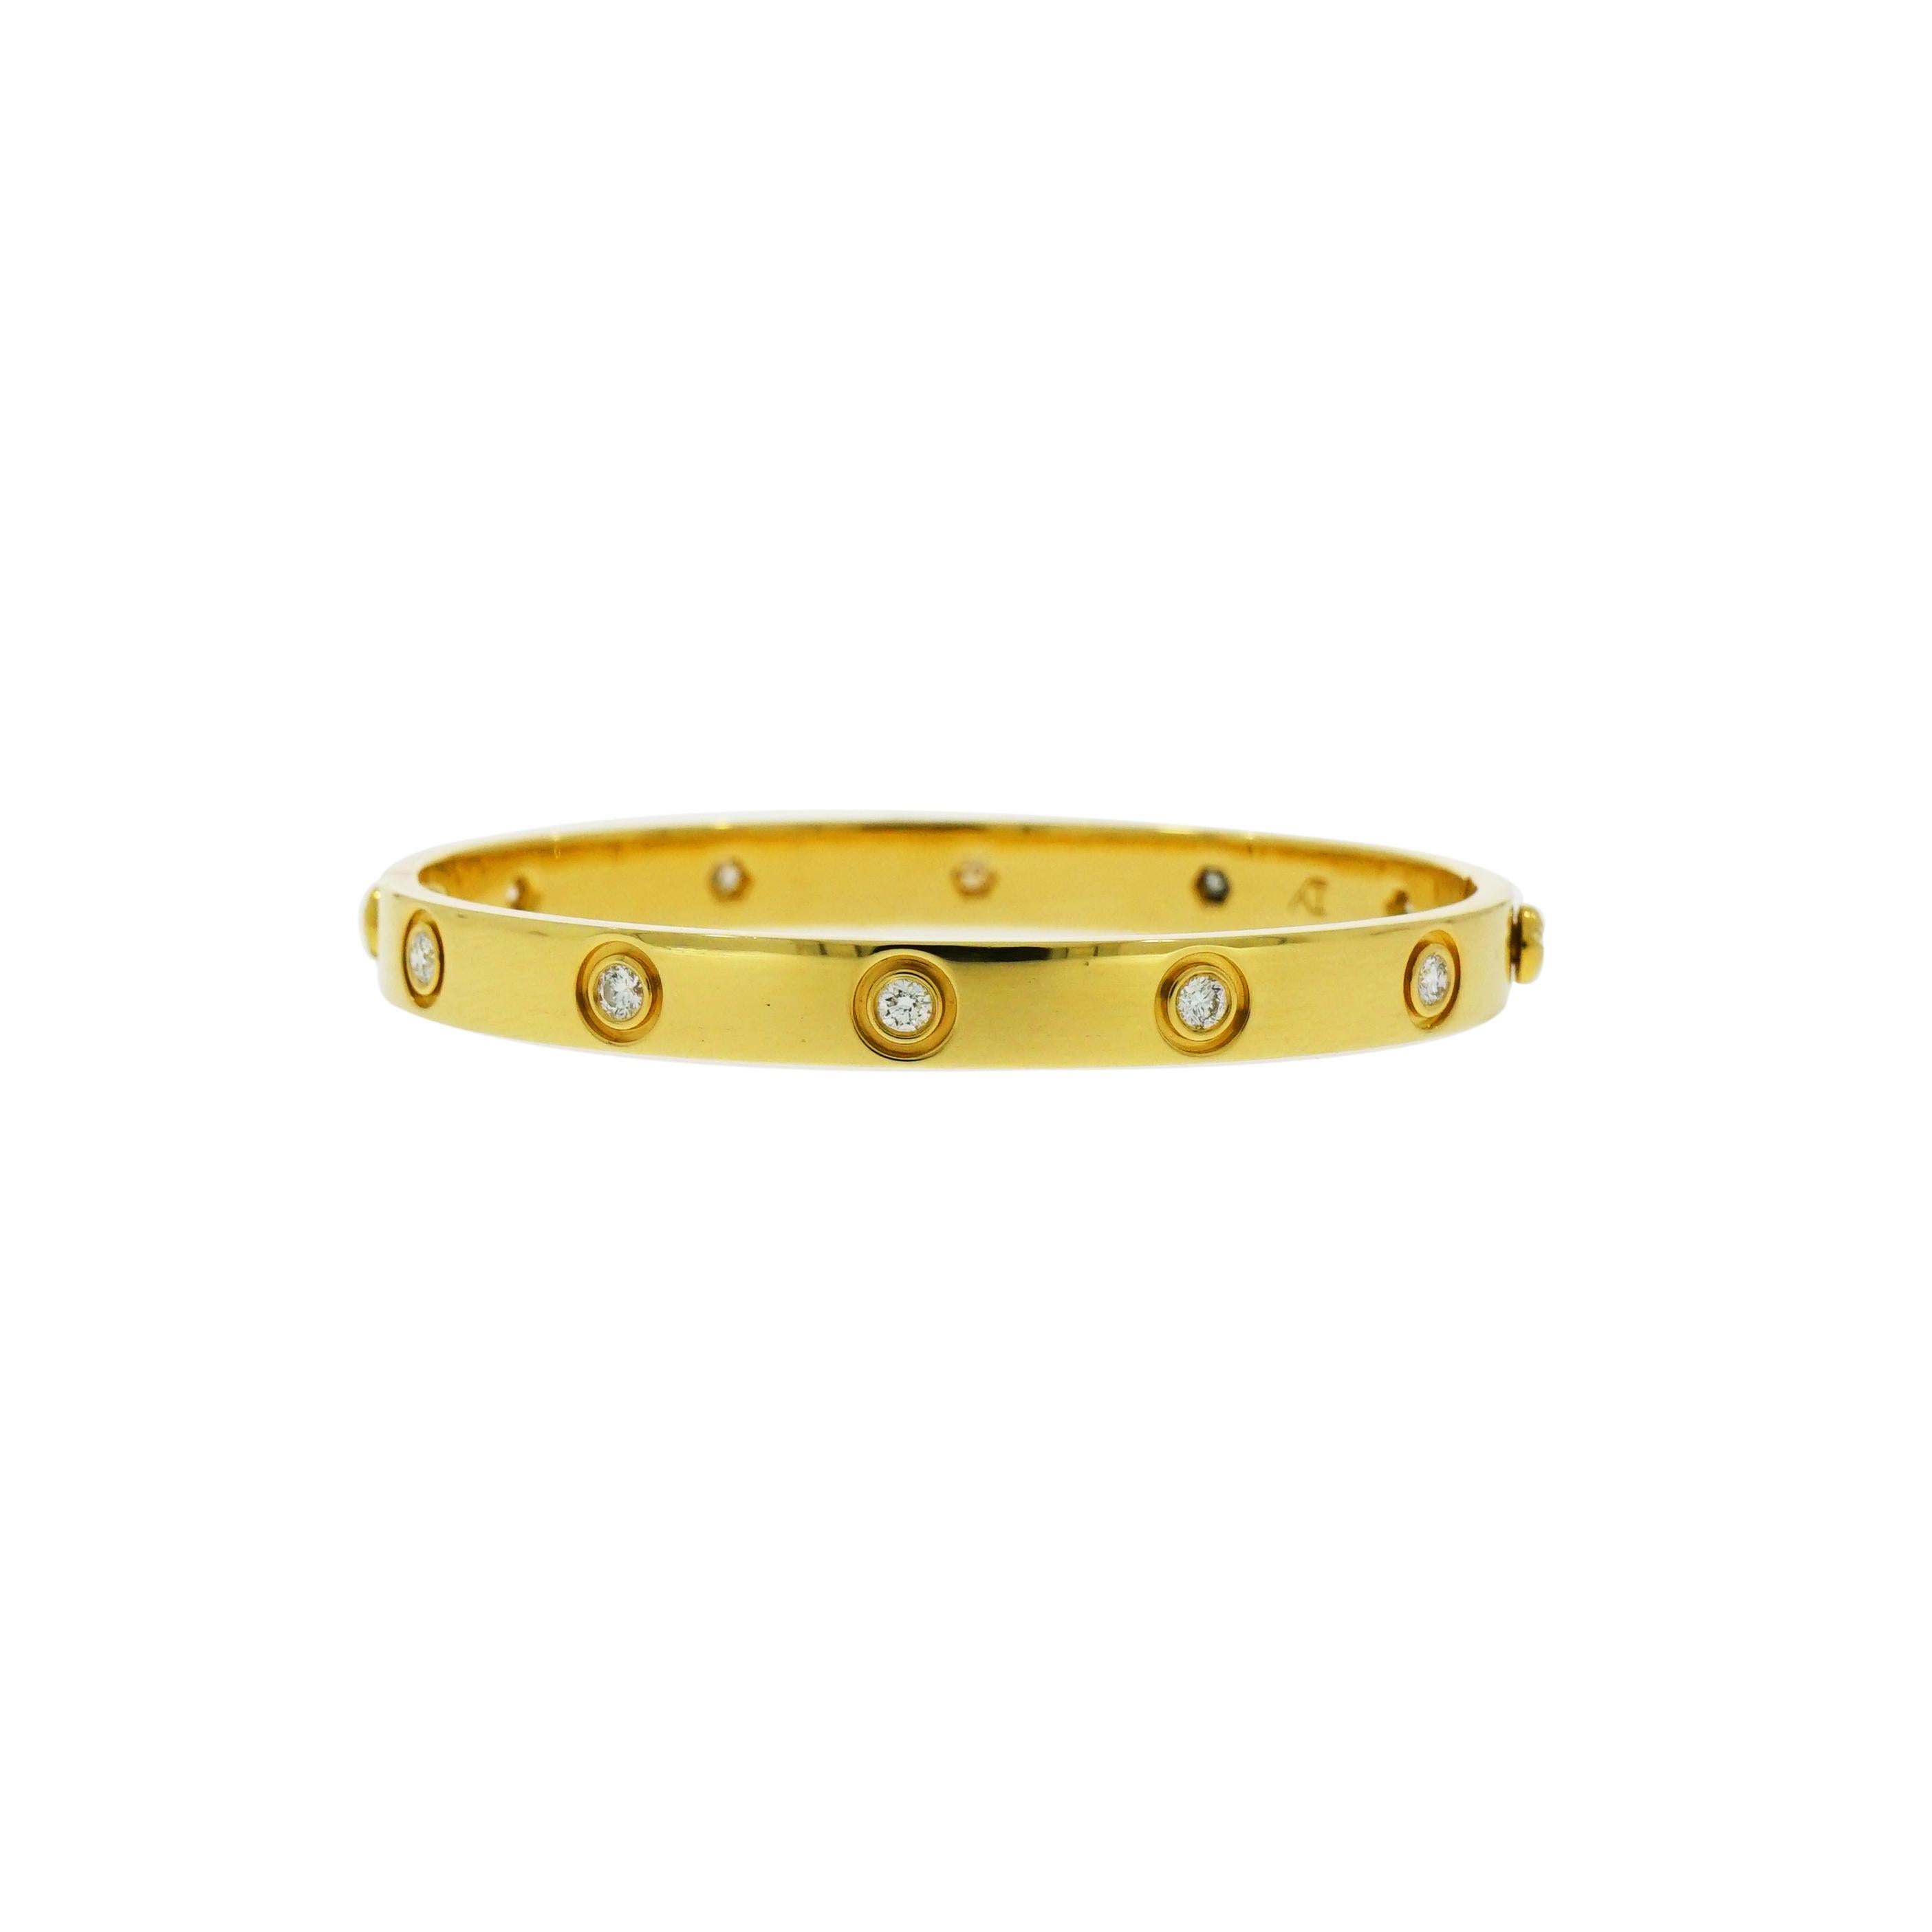 Iconic and Timeless, this Genuine Cartier Love bracelet crafted in 18k yellow gold and embedded with 10 diamonds around it. 
The look is to be stacked with similar style bangles or worn as a stand-alone piece. 
Completed with the original Cartier